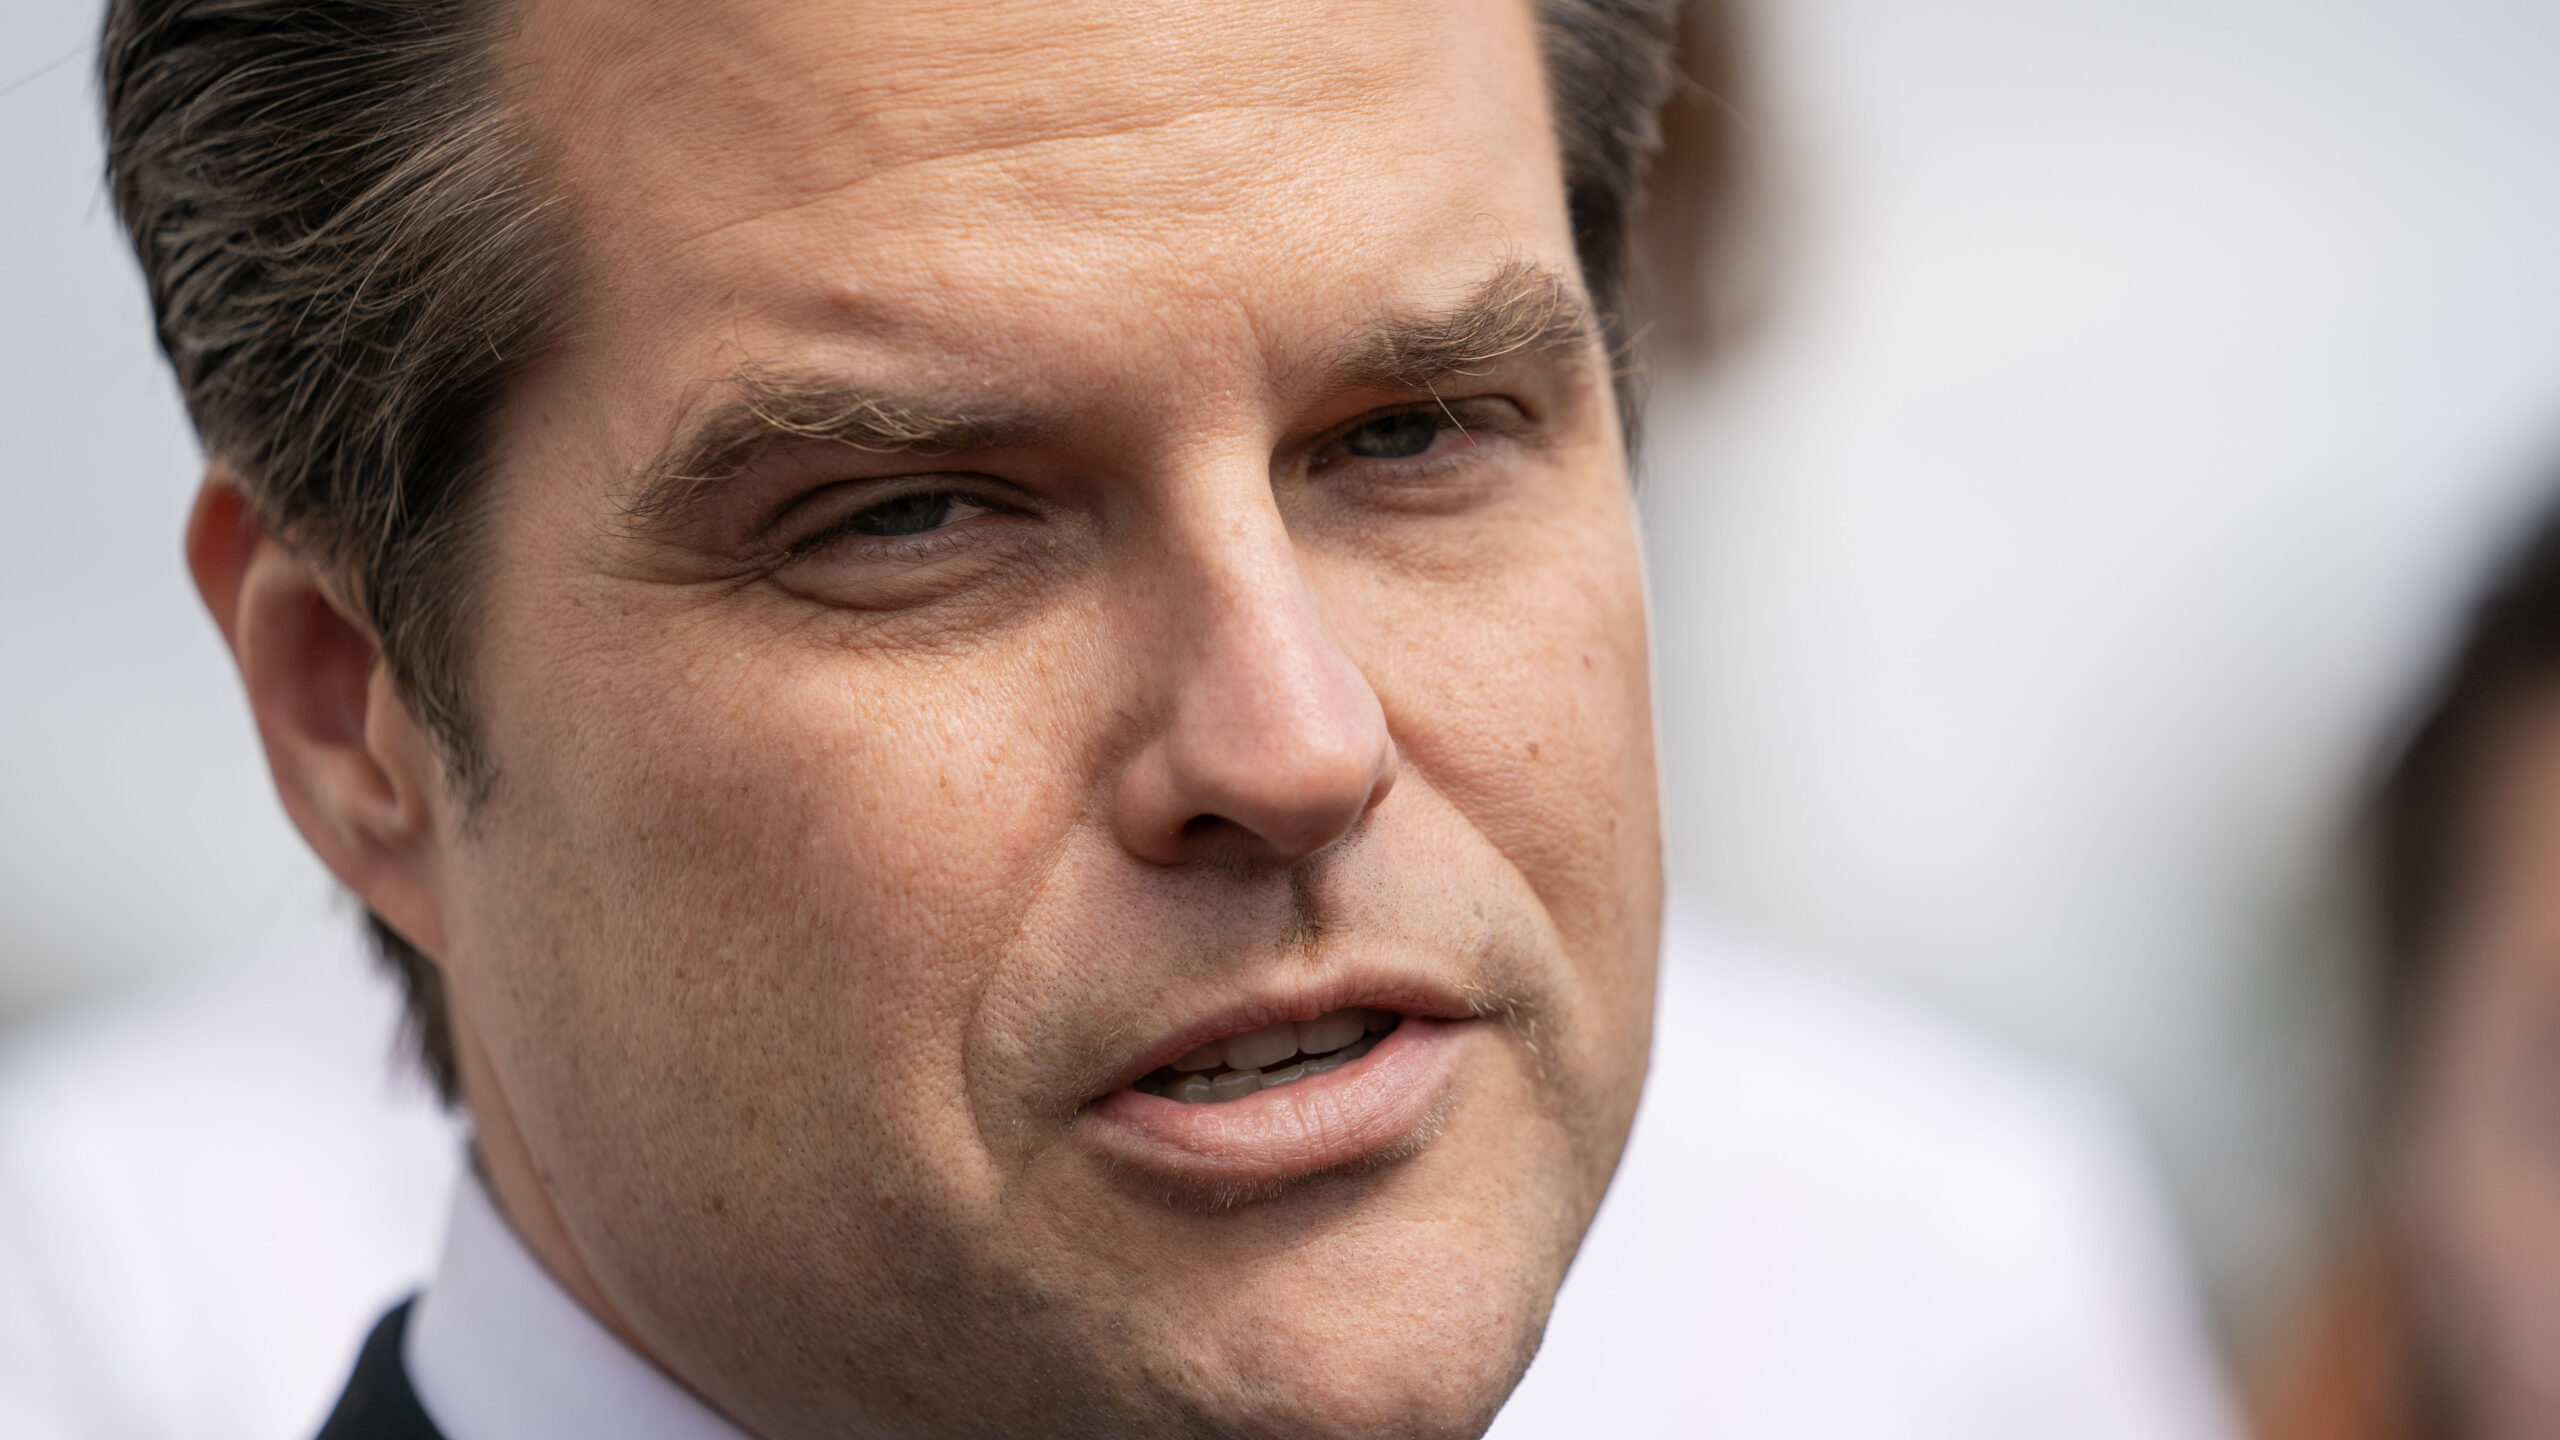 Some House Republicans Seek To Expel Matt Gaetz Pending Report From Ethics Committee